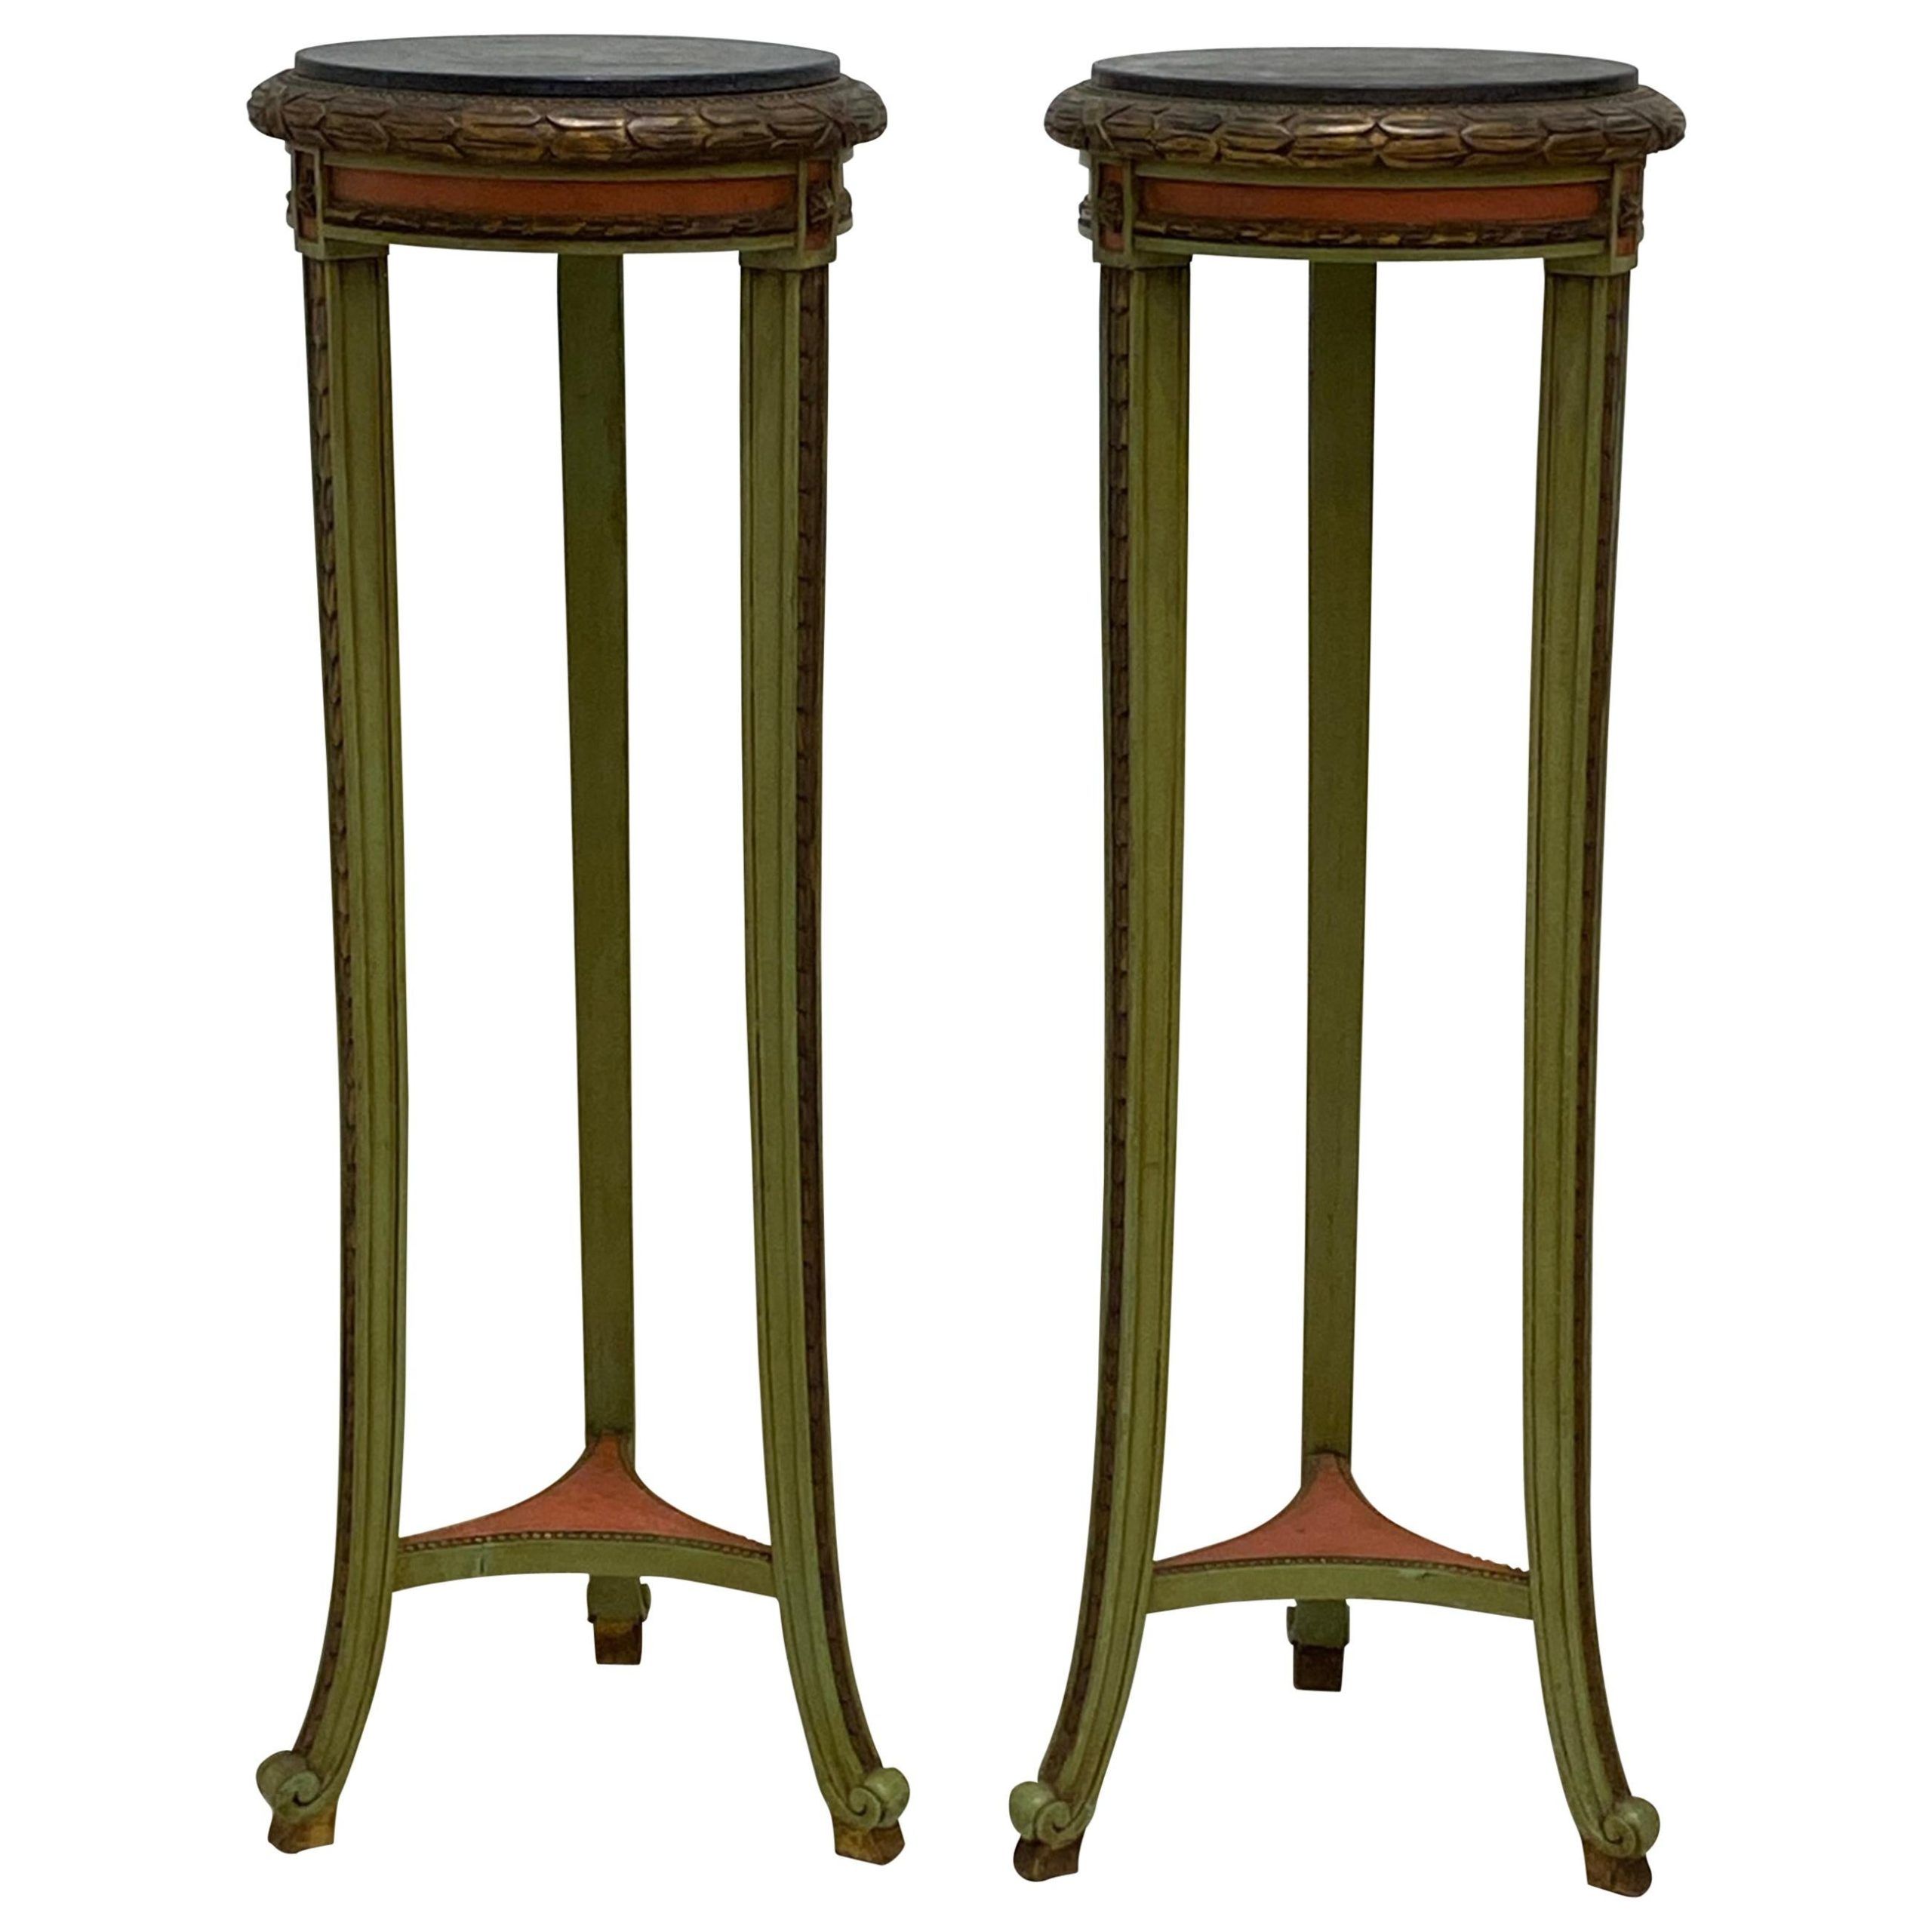 Tall Display Pedestals Or Plant Stands, A Pair At 1Stdibs | Tall Plant Stand,  Tall Stand, Pedestal Plant Stand In Pedestal Plant Stands (View 12 of 15)